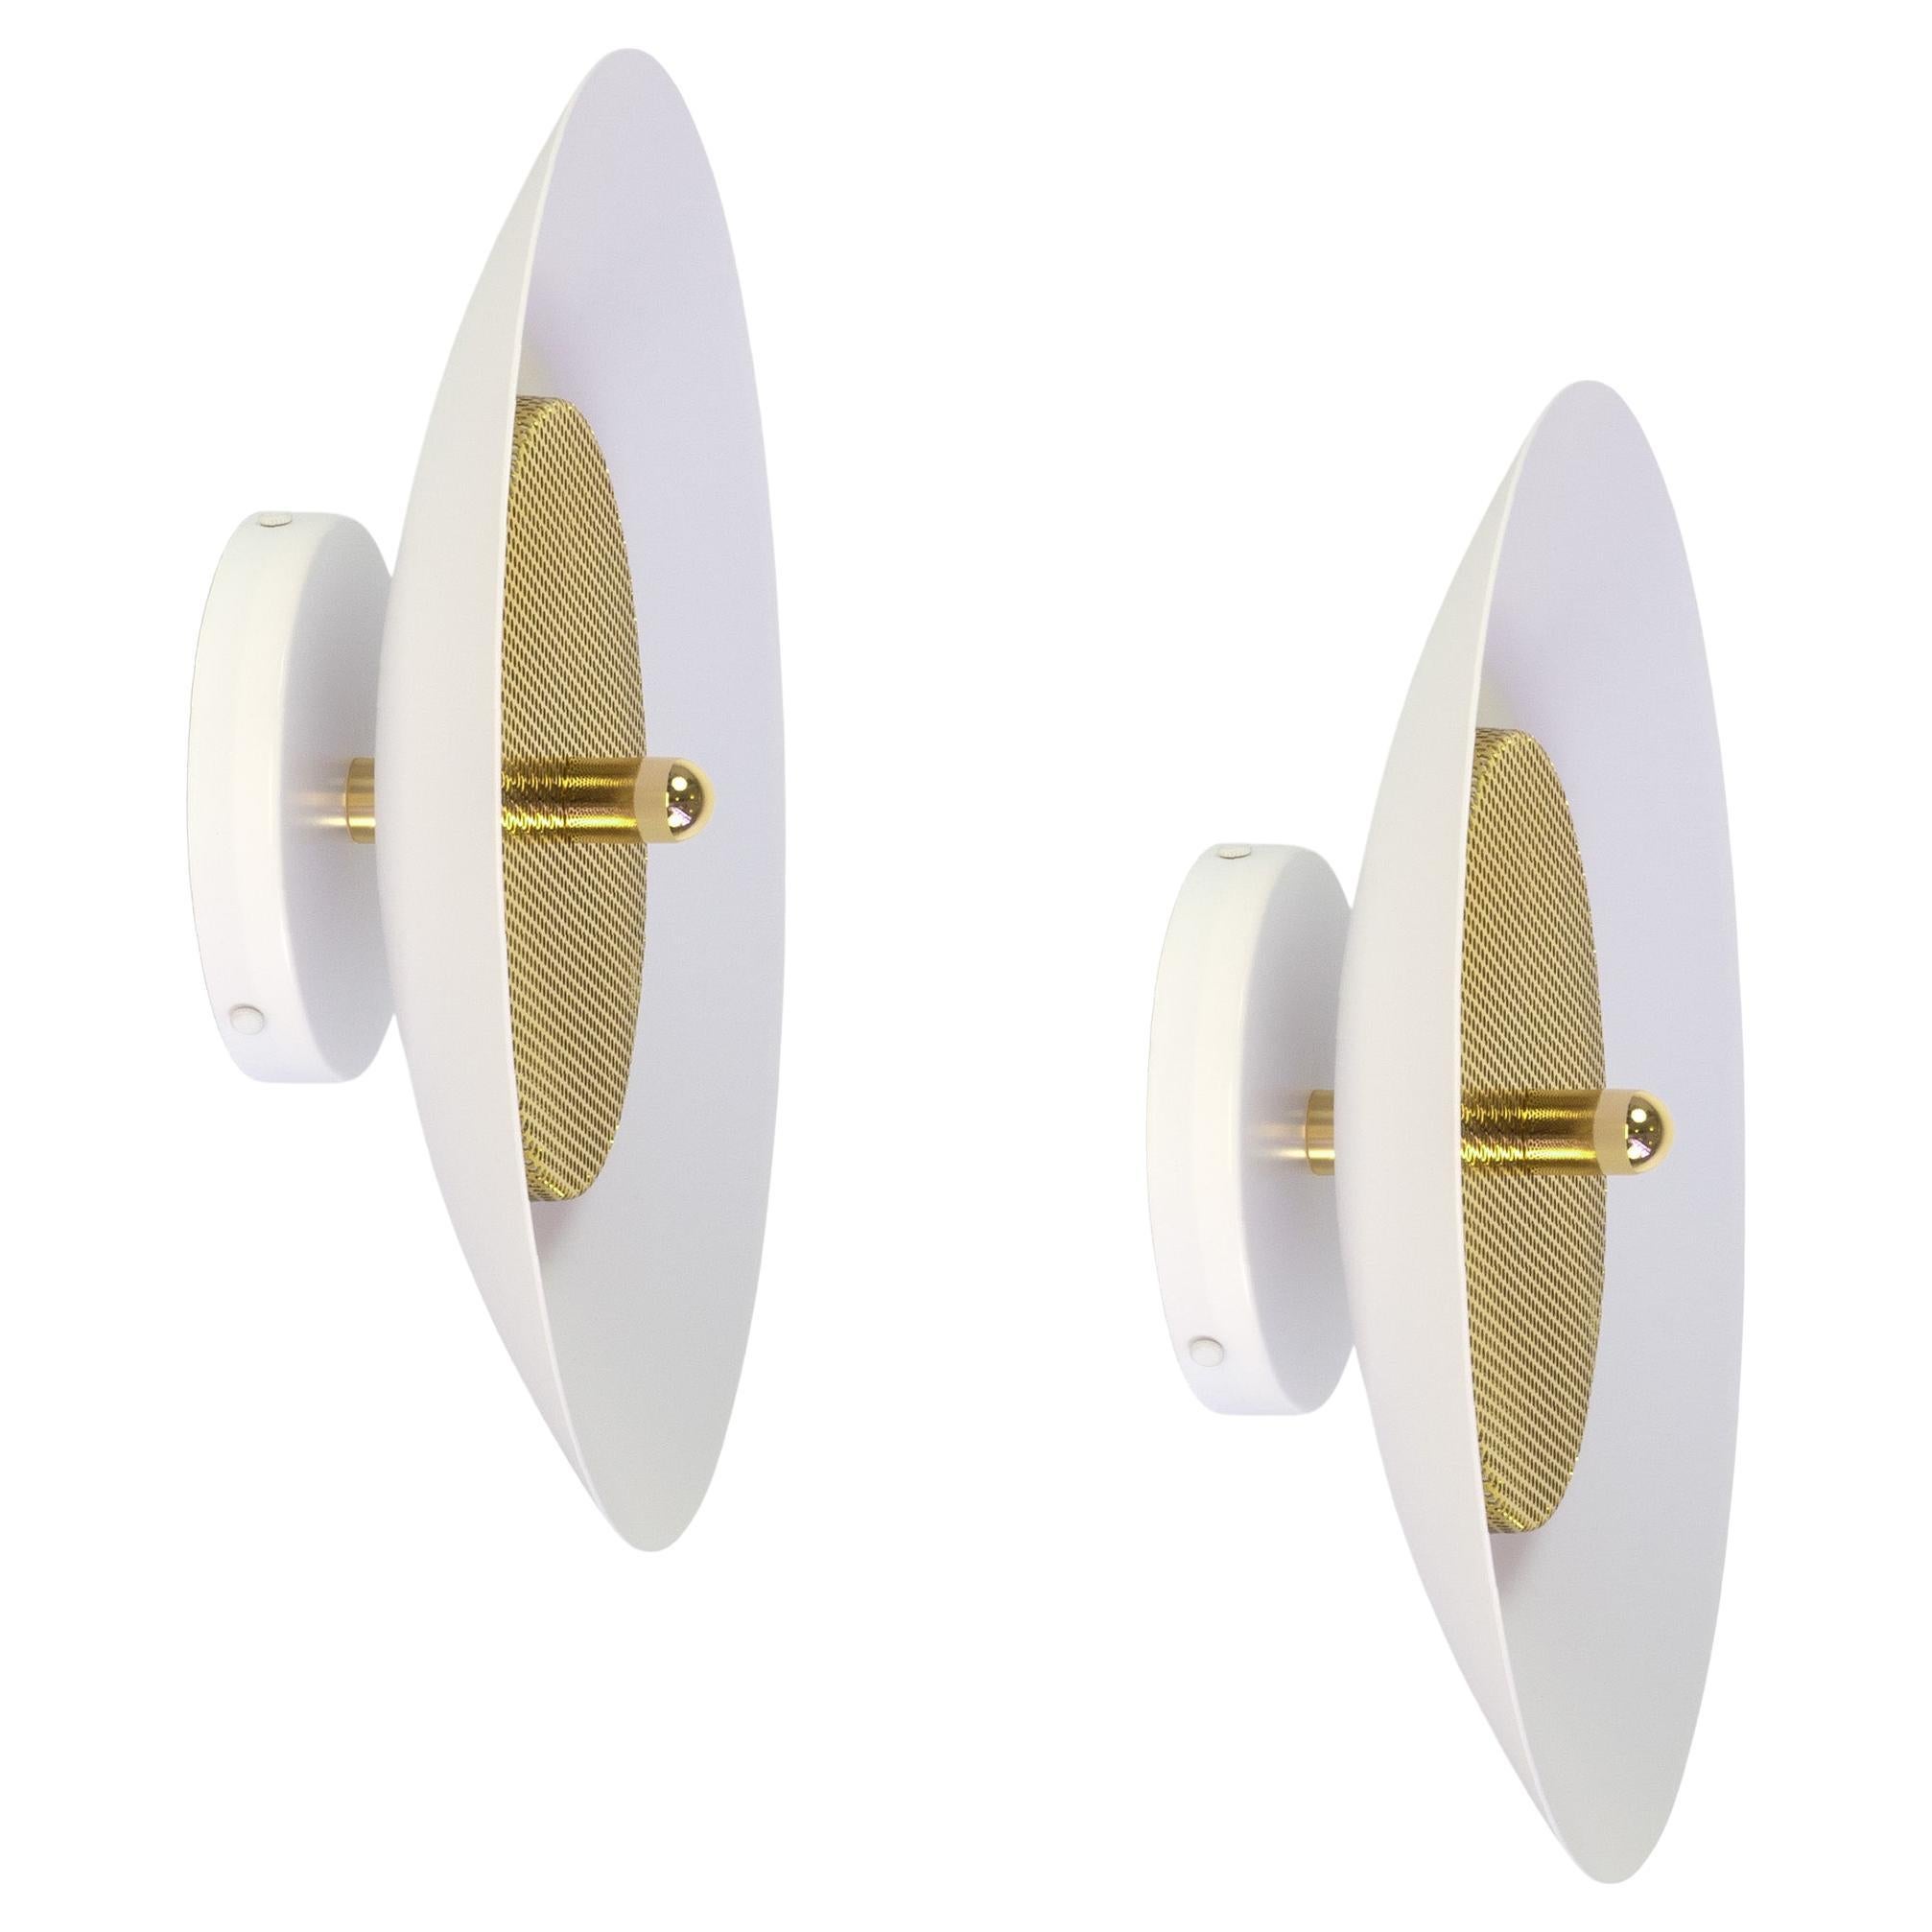 Pair of Signal Sconce from Souda, White and Brass, Made to Order For Sale